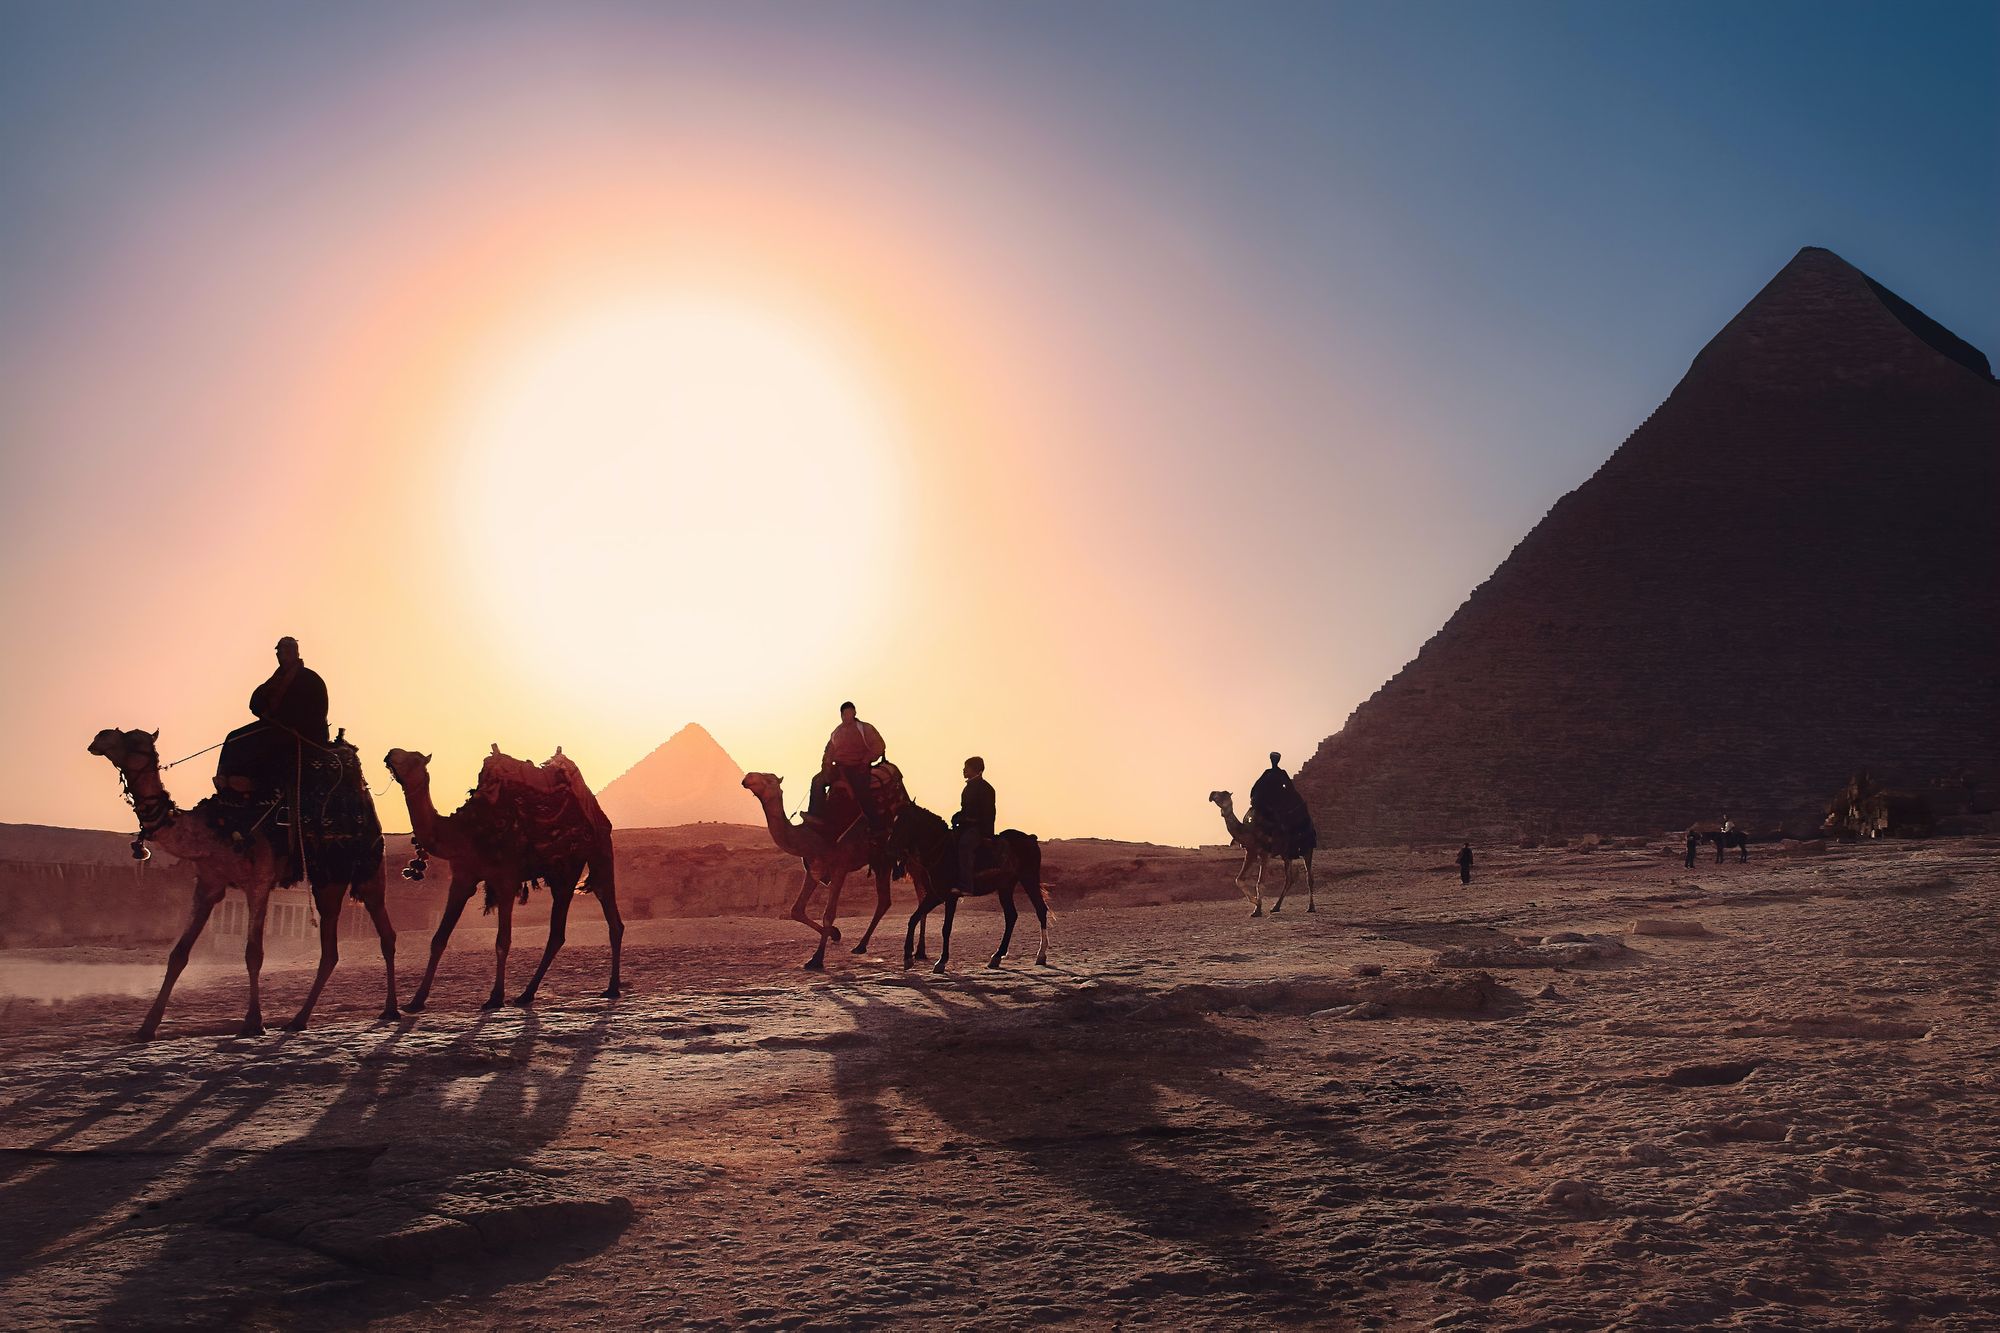 Wherever You Stay in Egypt, here are 8 popular hotels you should consider